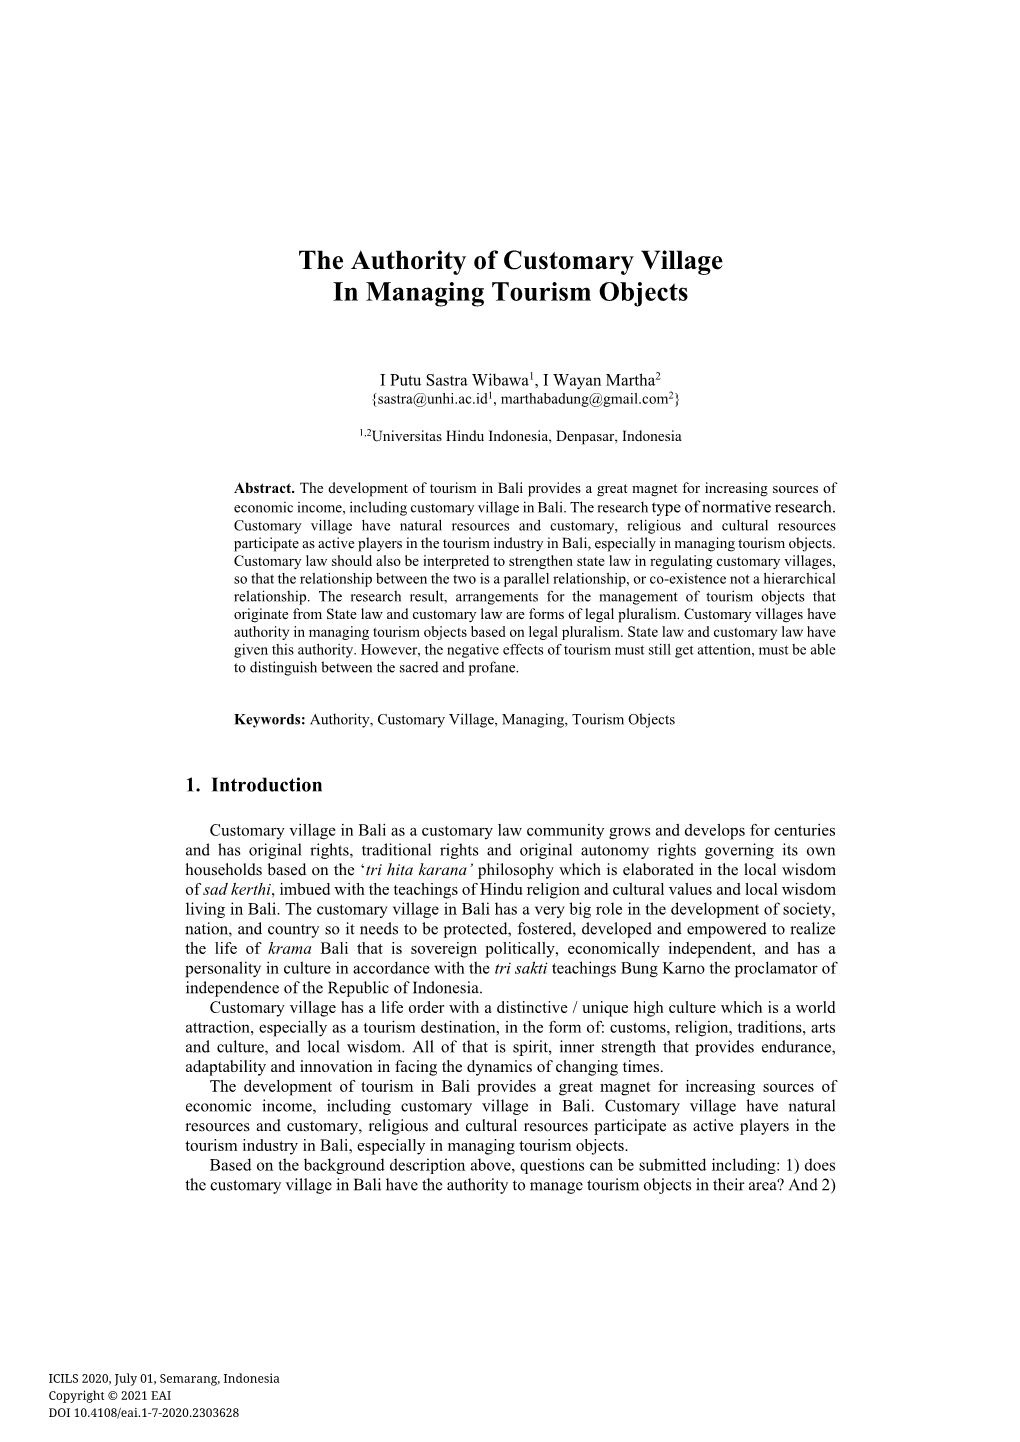 The Authority of Customary Village in Managing Tourism Objects